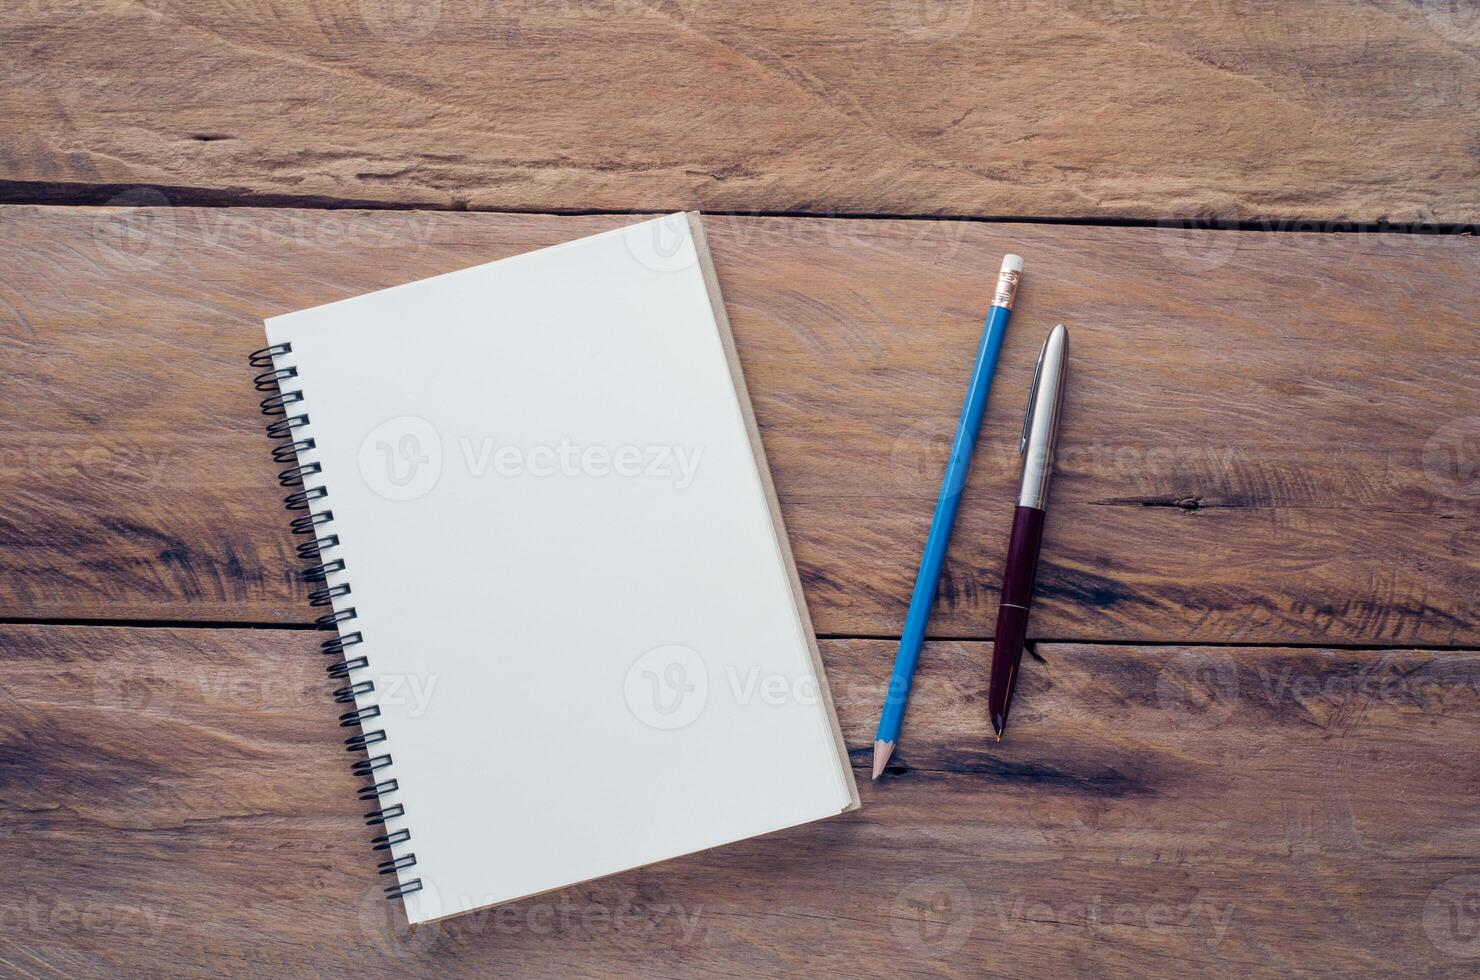 blank notebook with pencil and pen on wooden table - still life photo